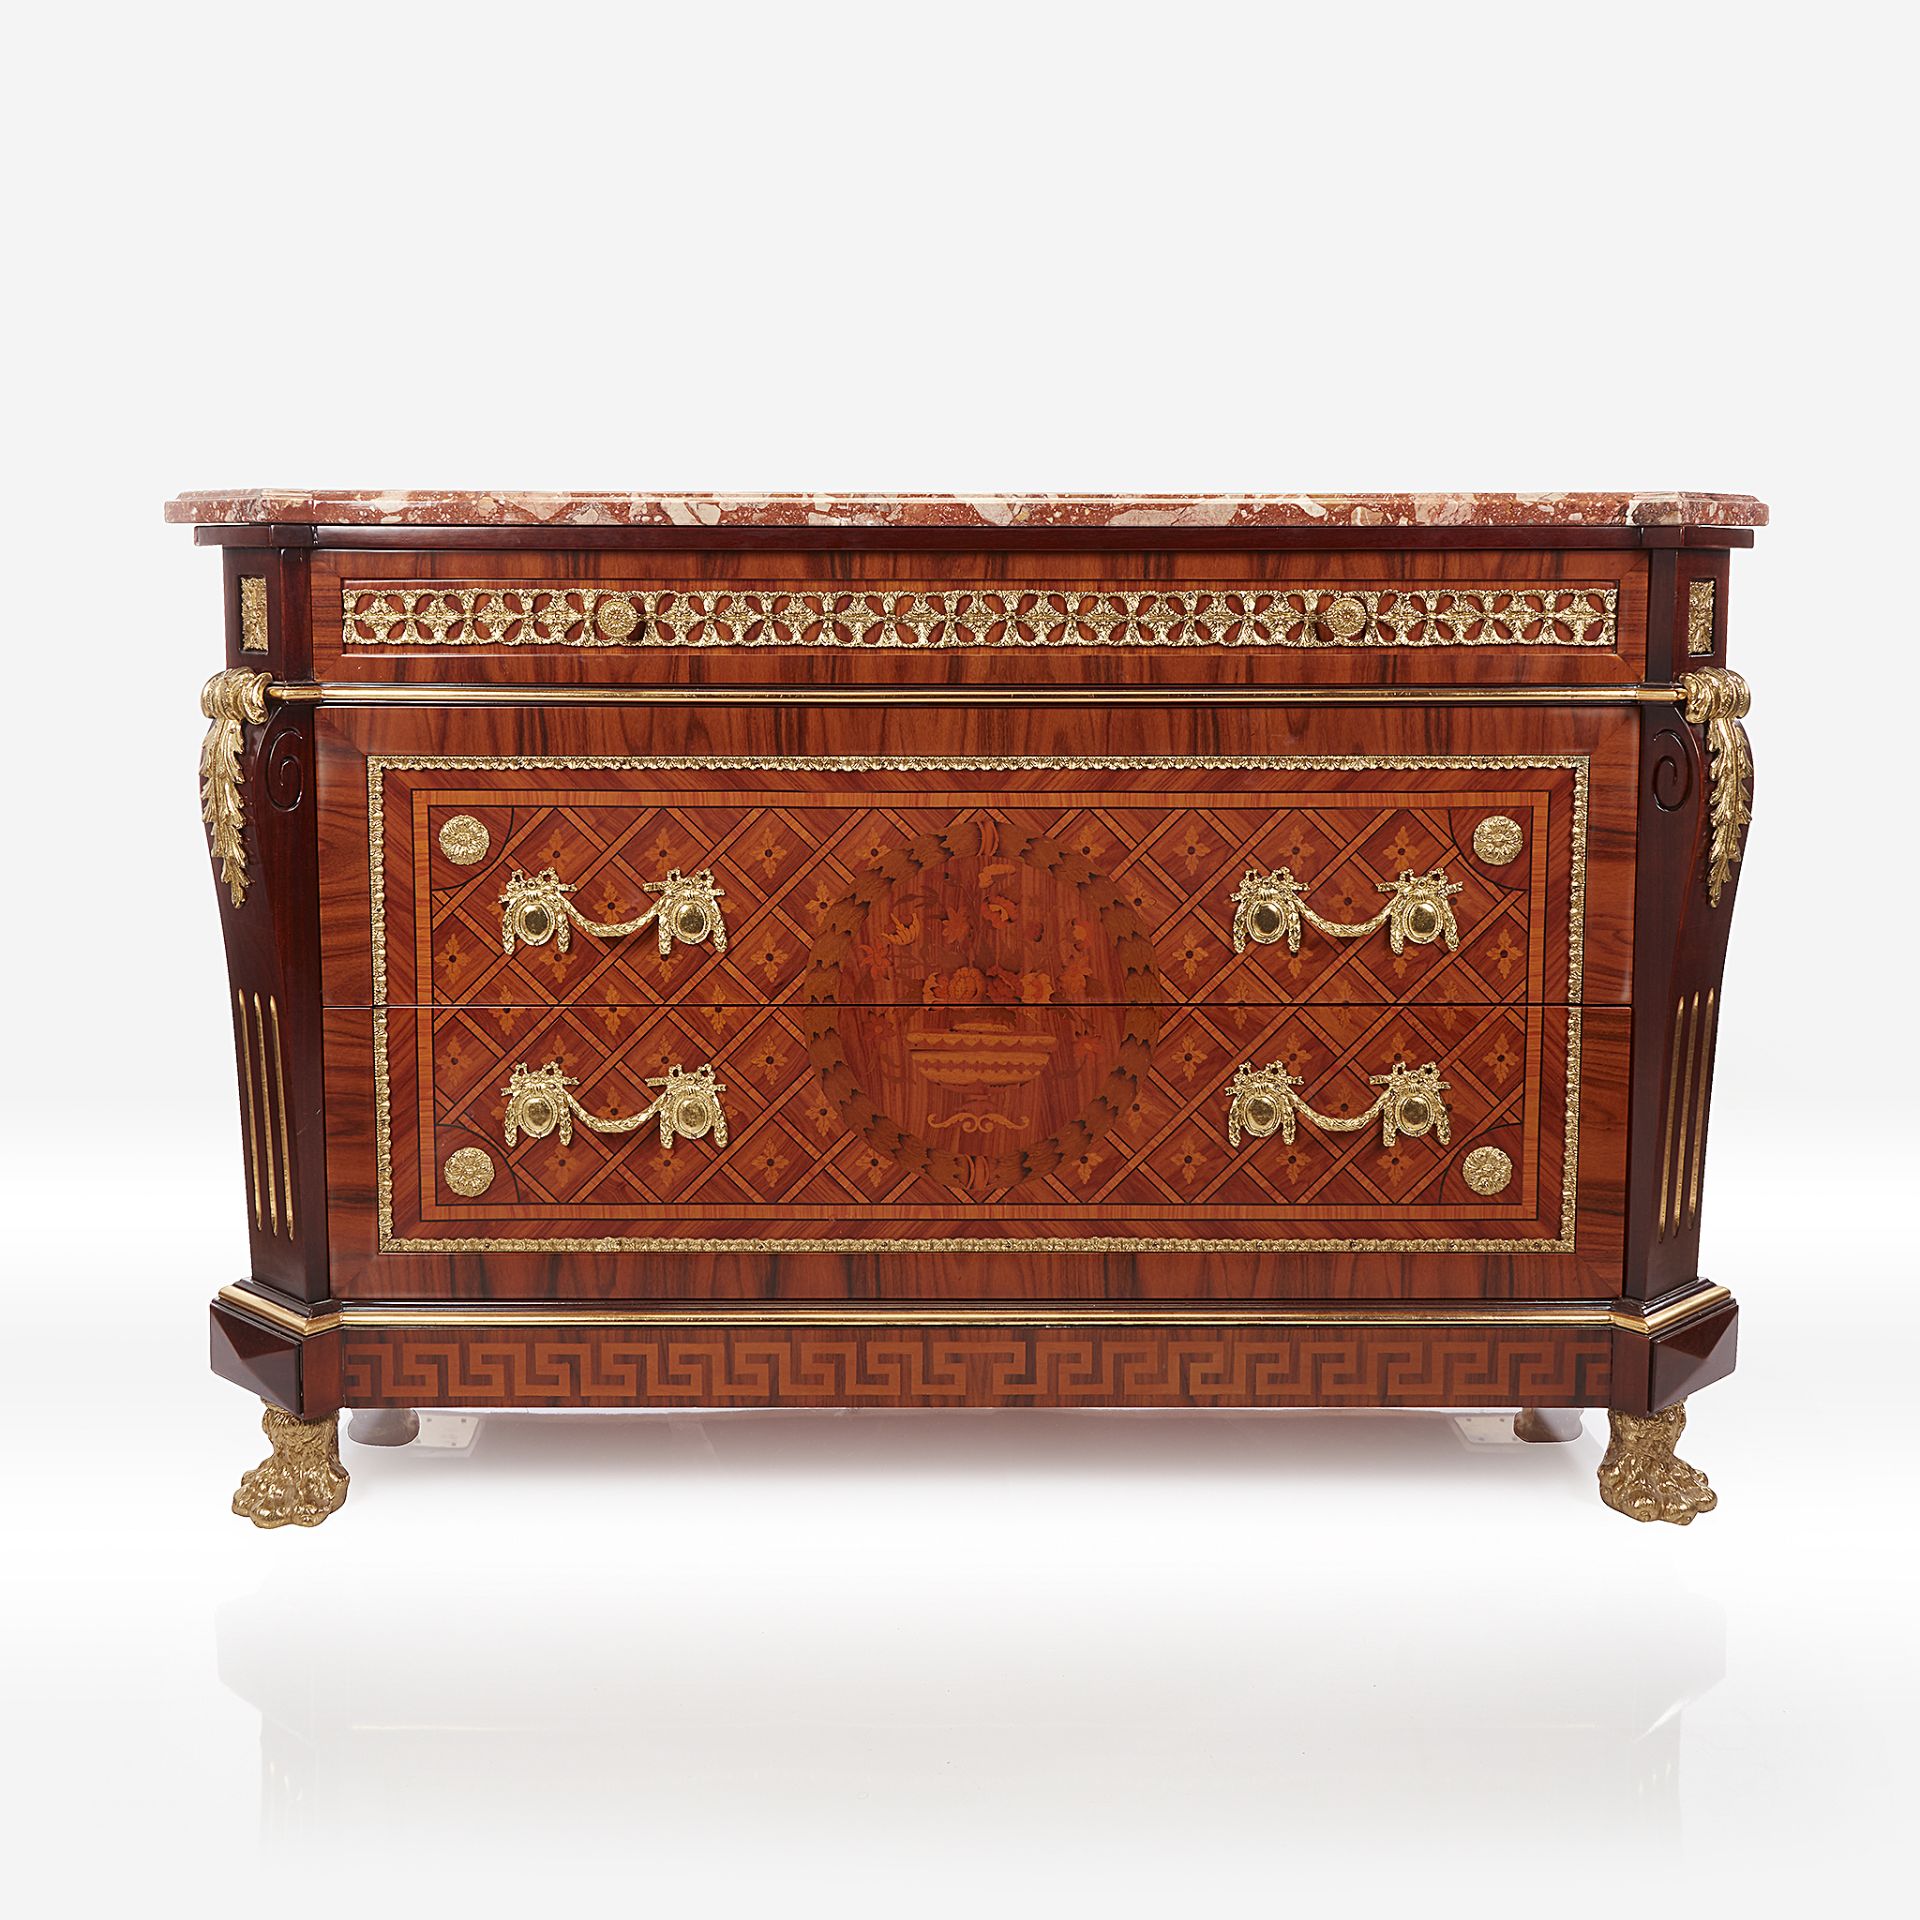 A Louis XVI style gilt-bronze mounted specimen wood marqetry and parquetry kingwood commode with bre